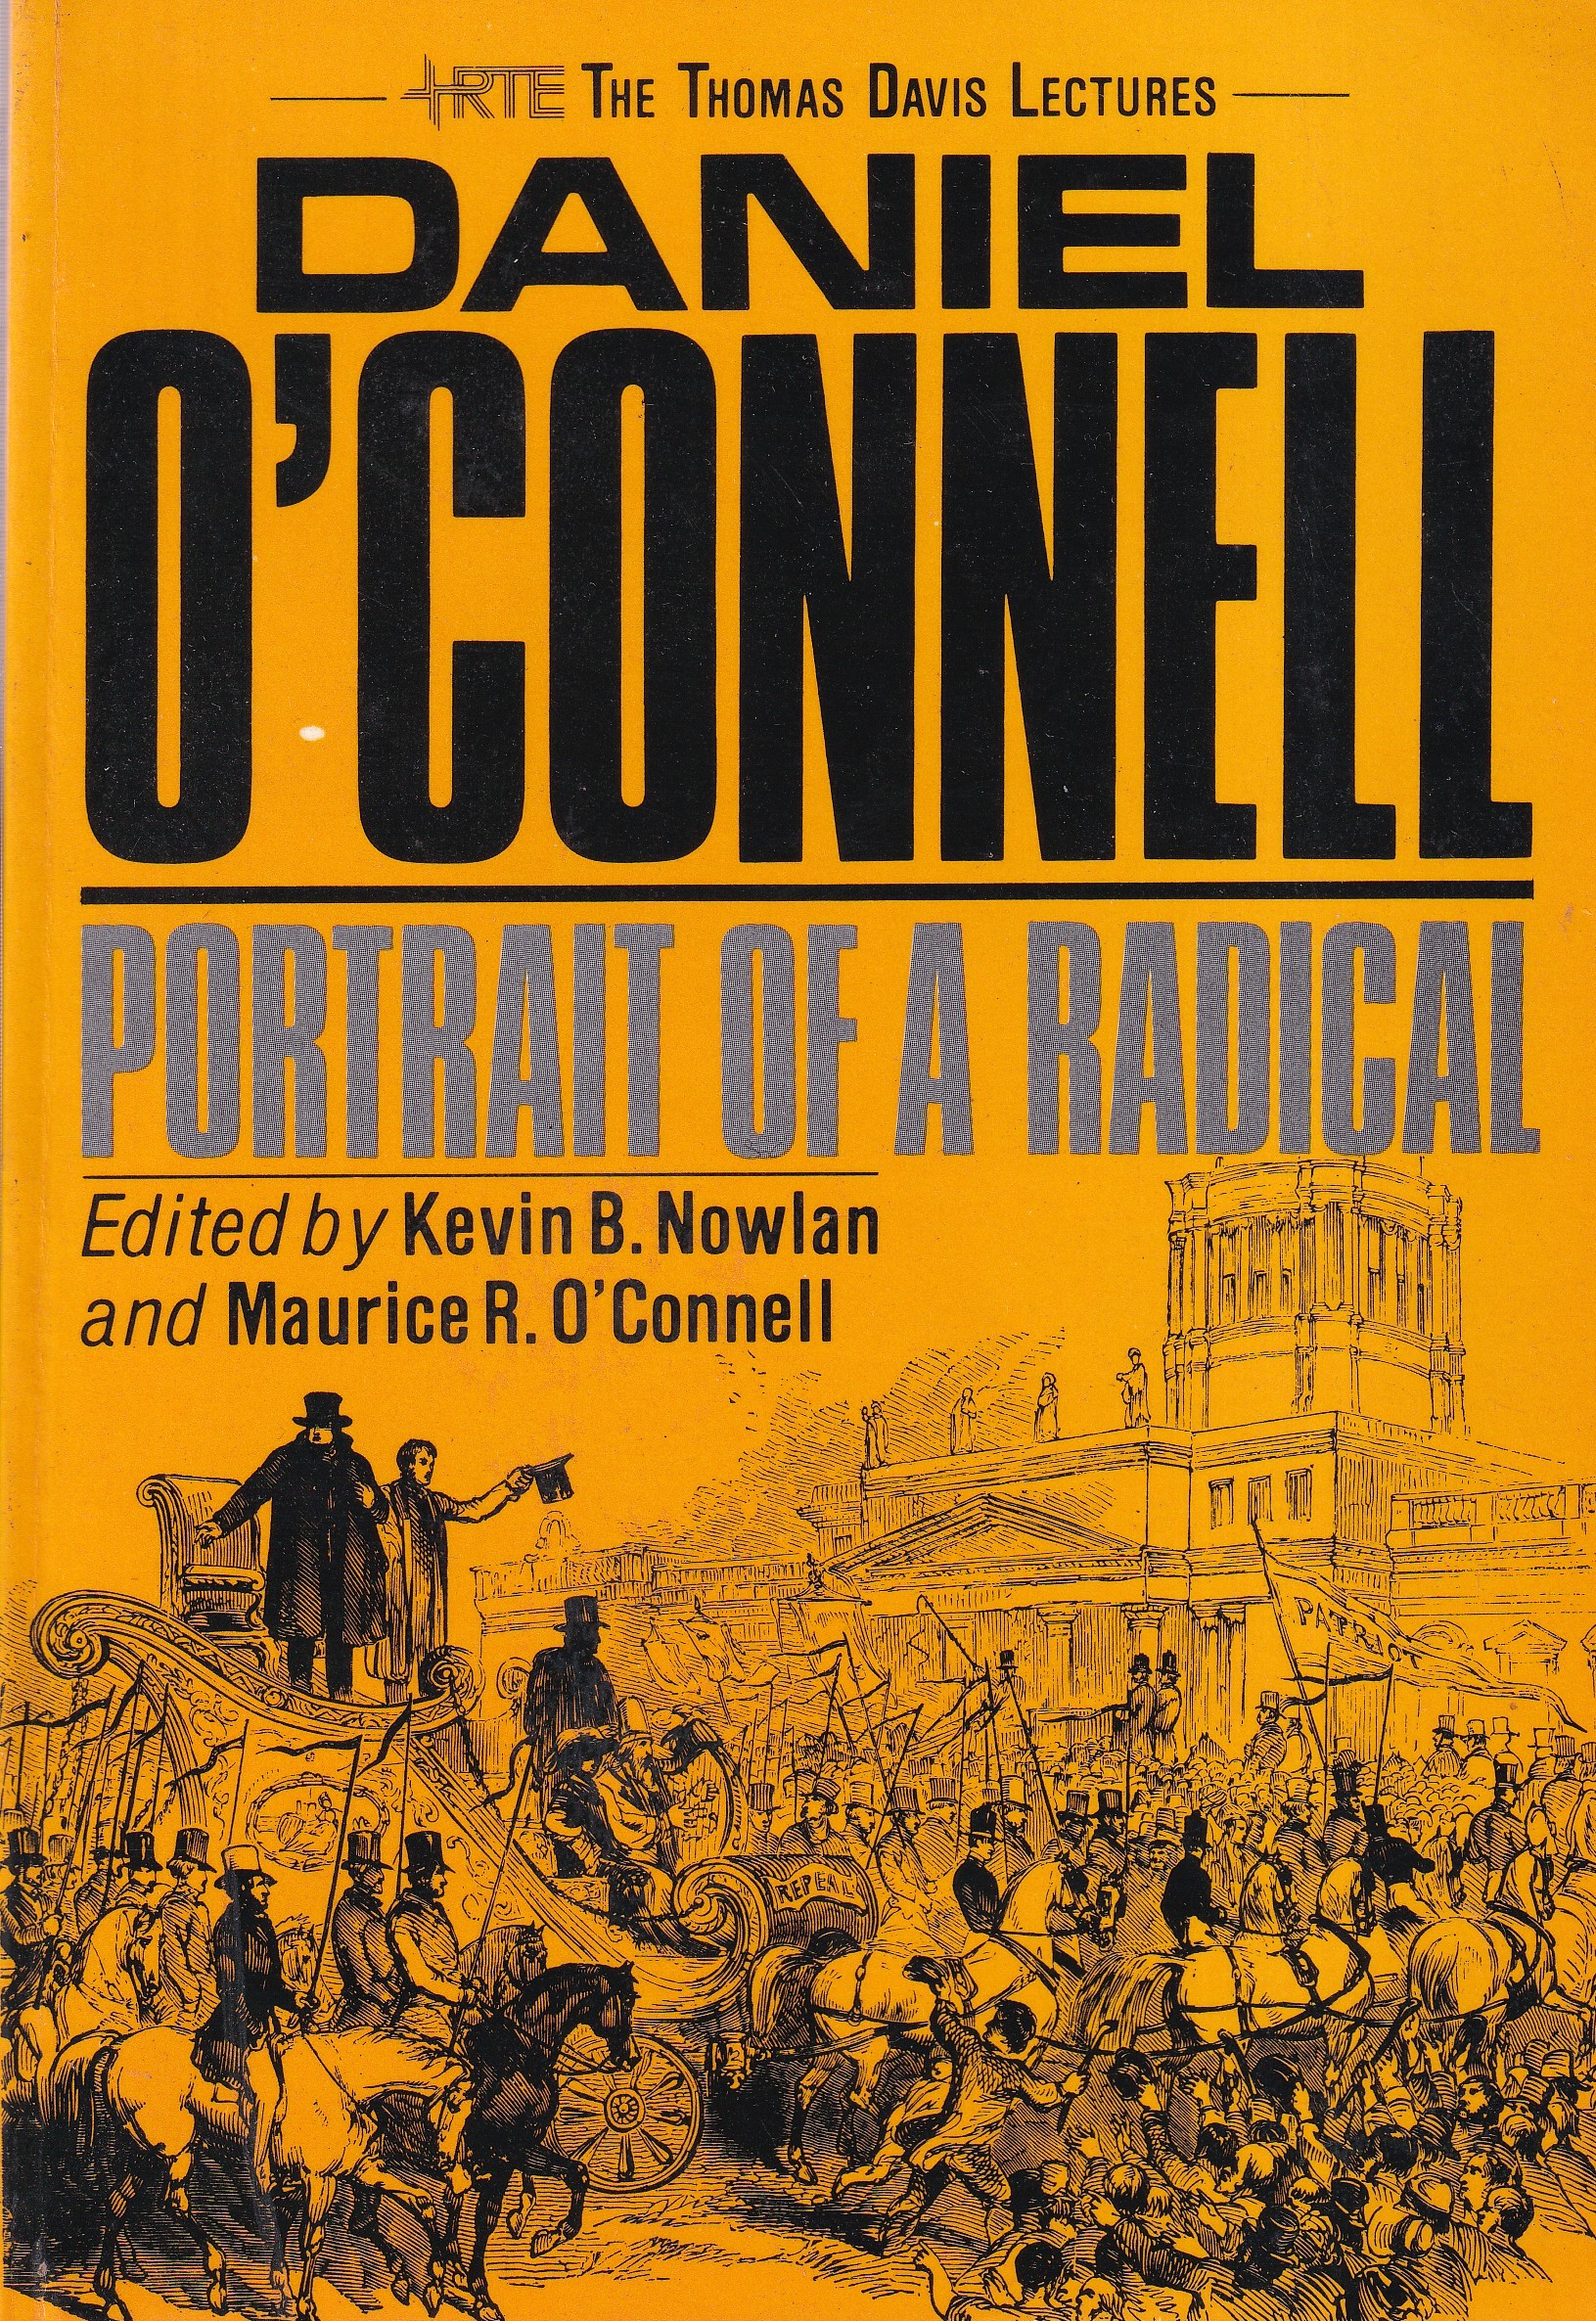 Daniel O’Connell: Portrait of a Radical | Kevin B. Nowlan and Maurice R. O'Connell (eds.) | Charlie Byrne's